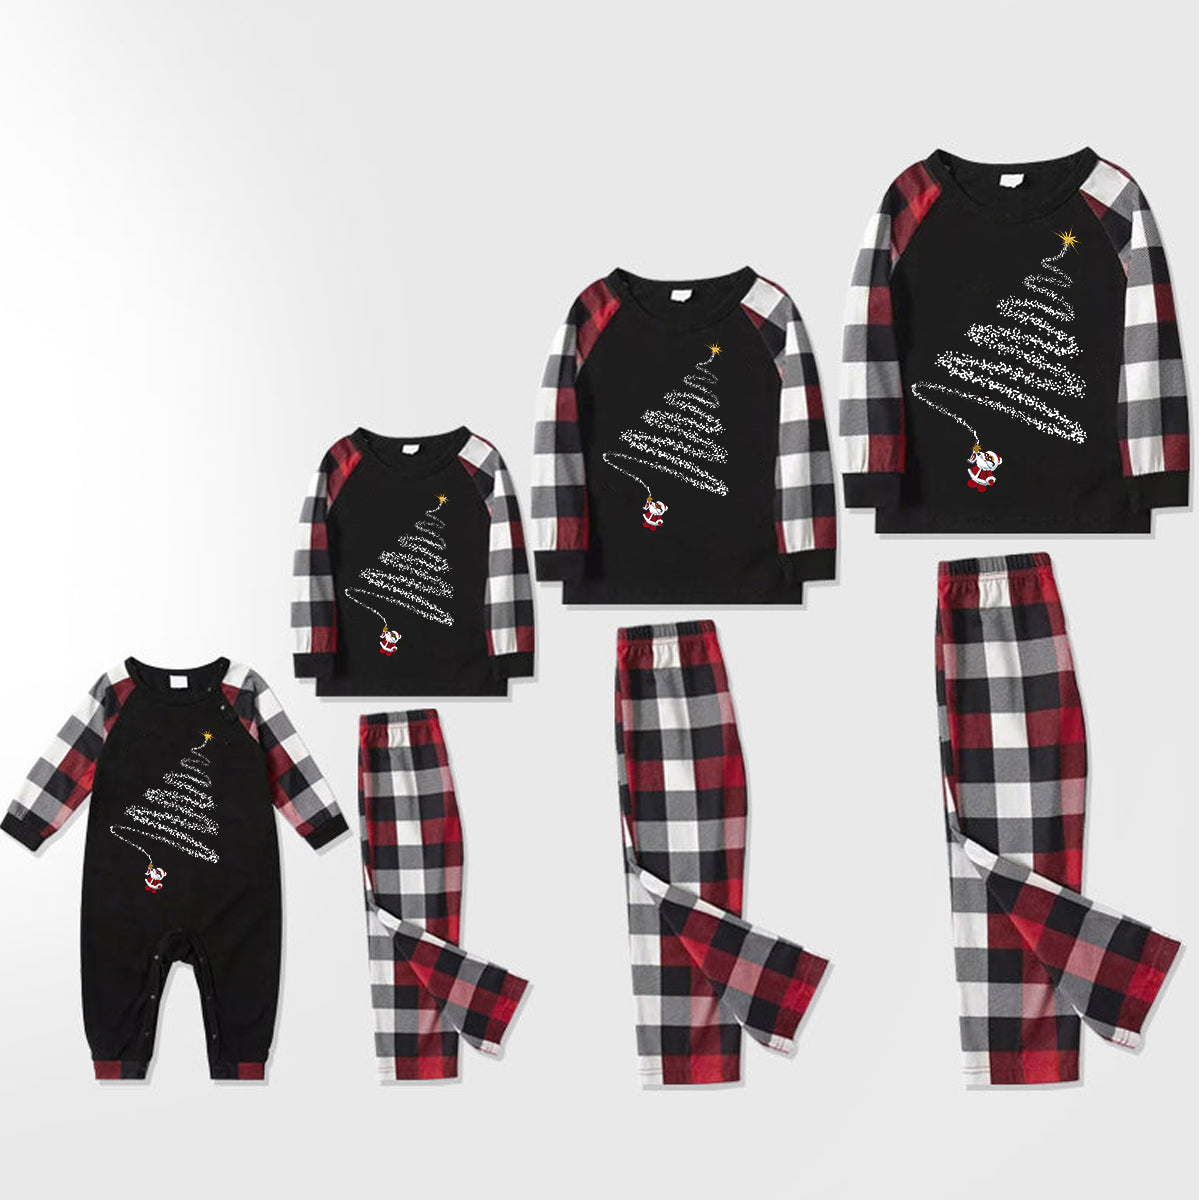 Christmas Tree & "Making Memories Together" Patterned Plaid Sleeve Contrast Tops and Red & Black & White Plaid Pants Family Matching Pajamas Set With Dog Bandana